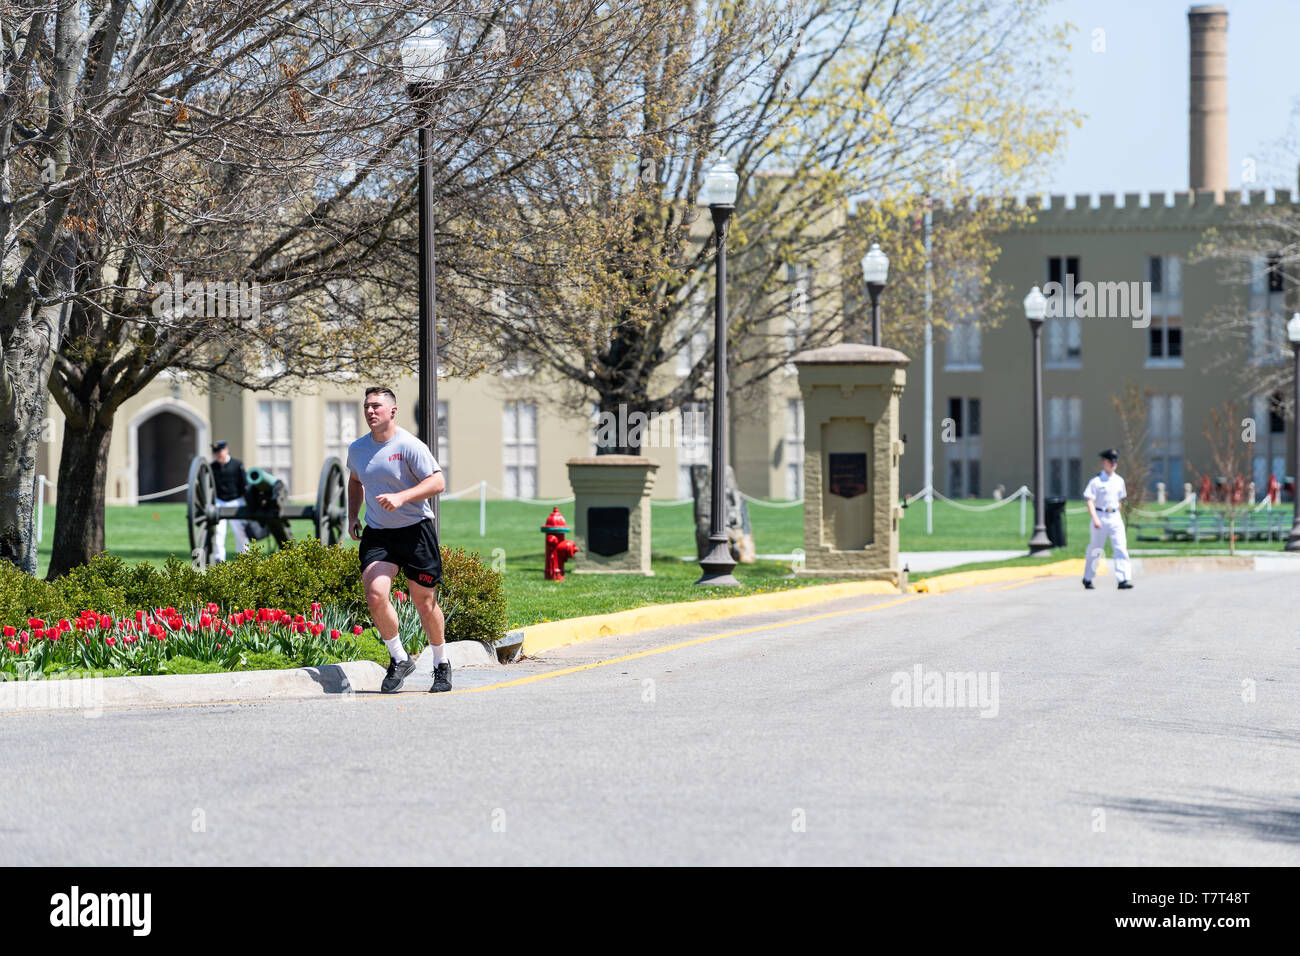 Lexington, USA - April 18, 2018: Man training, jogging or running at Virginia Military Institute main campus grounds with cadets walking in white unif Stock Photo